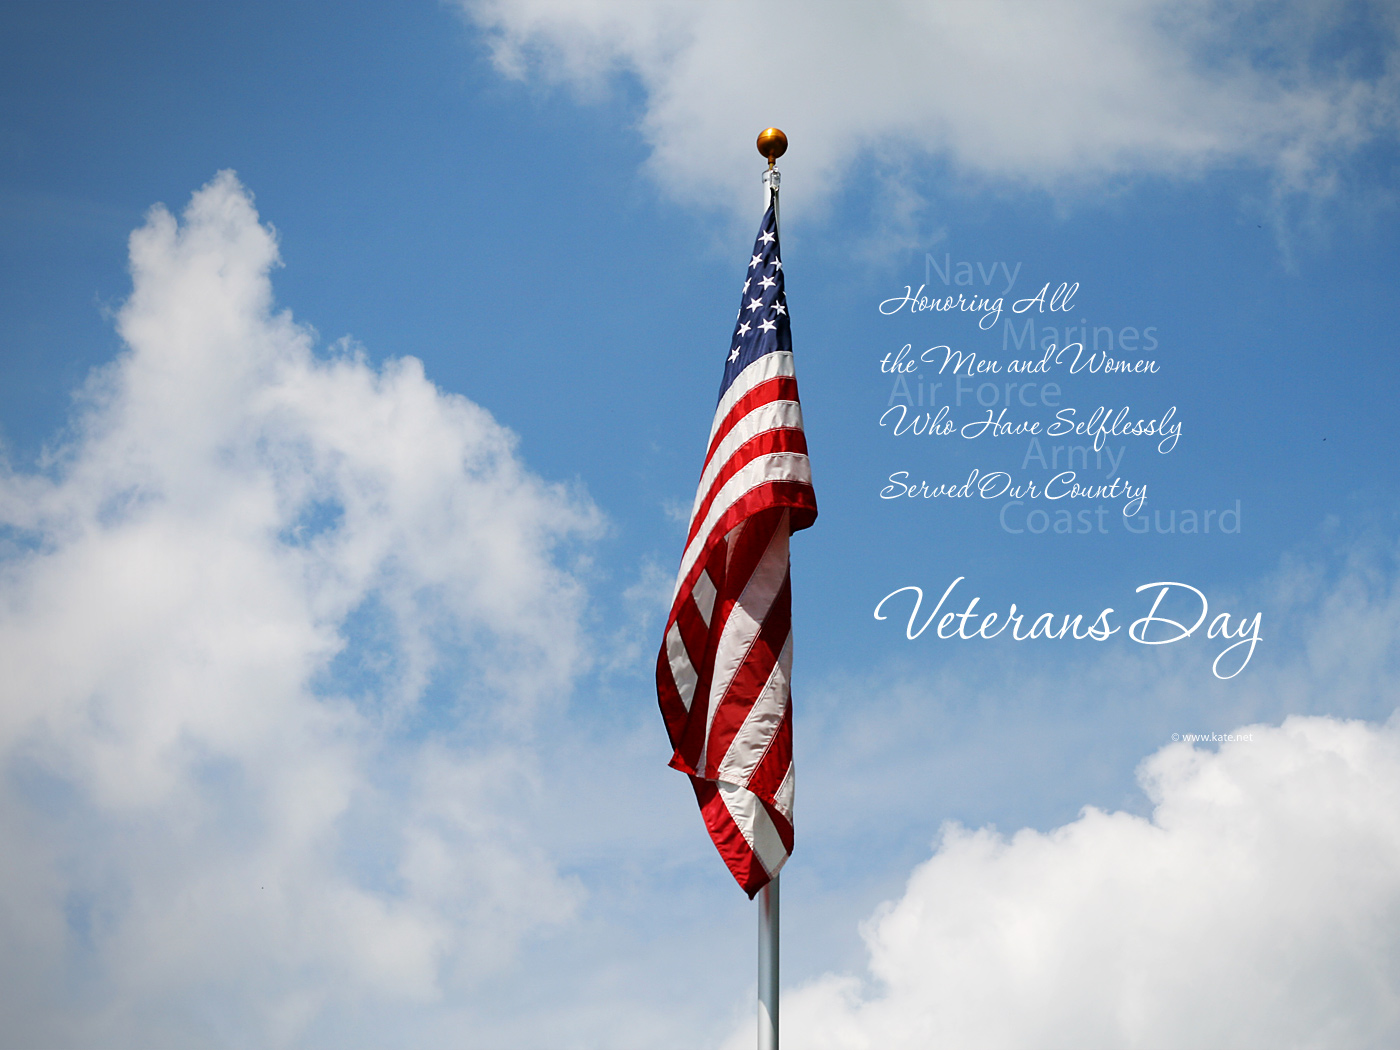 veterans day images free download